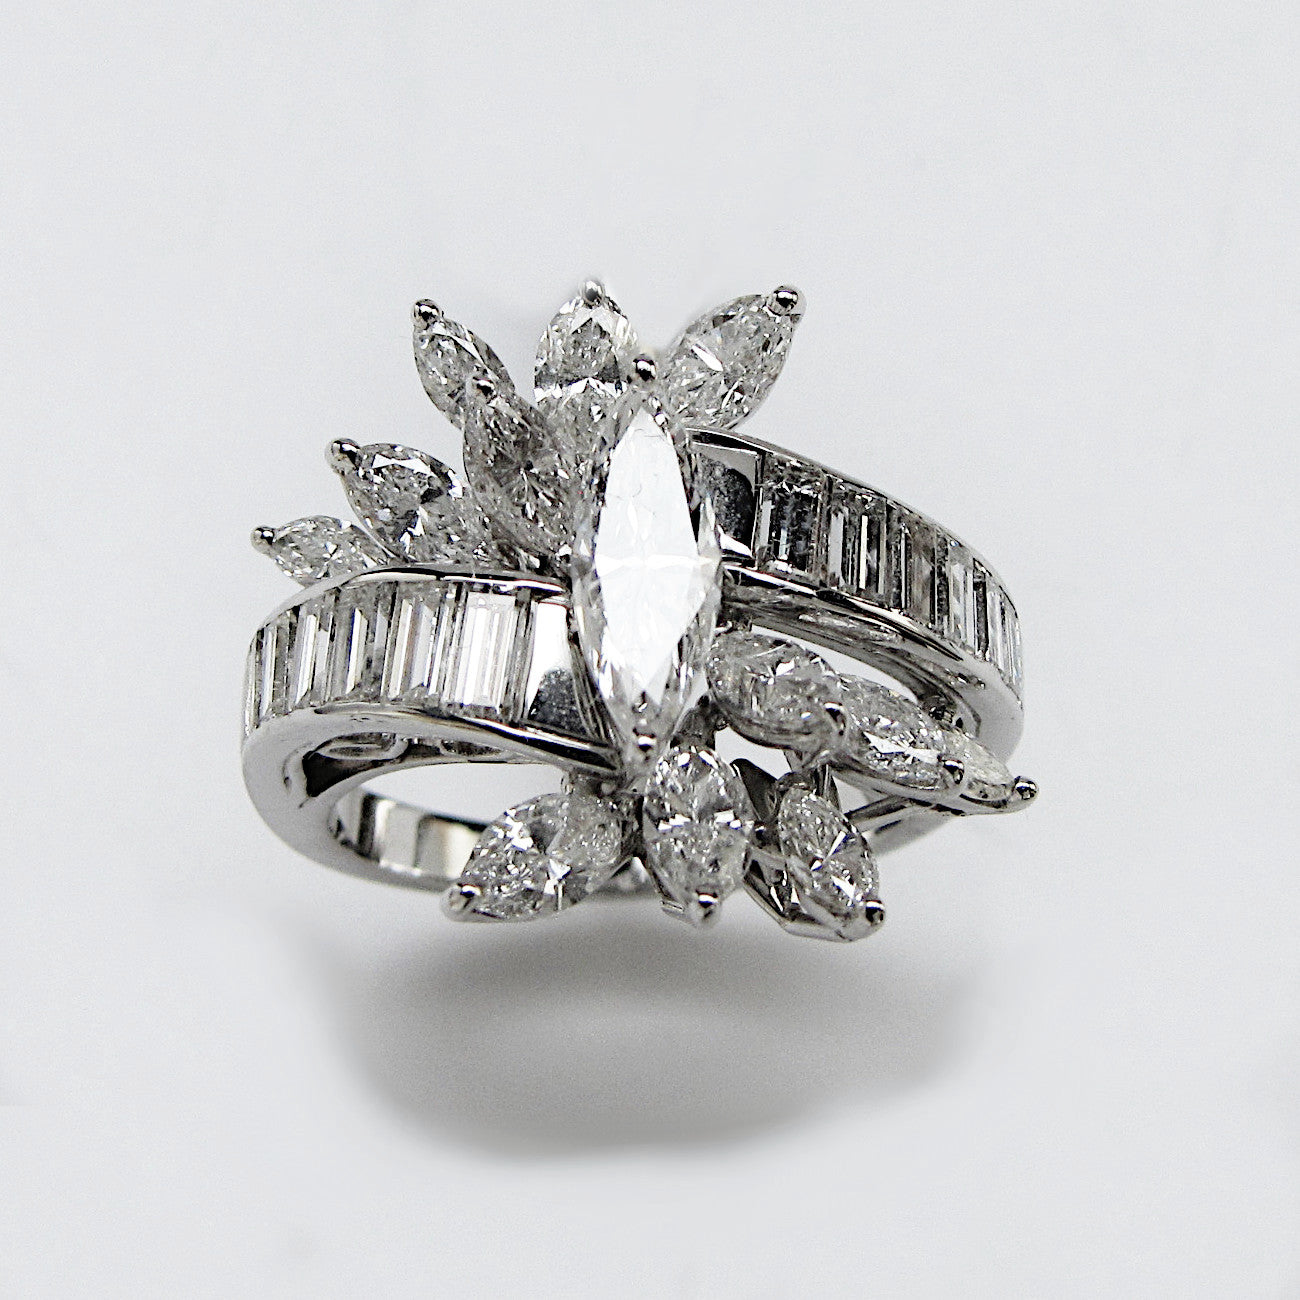 natural marquise diamond ring, 18 k white gold, weight about 6,30 g (0,22 oz),  width 17 mm